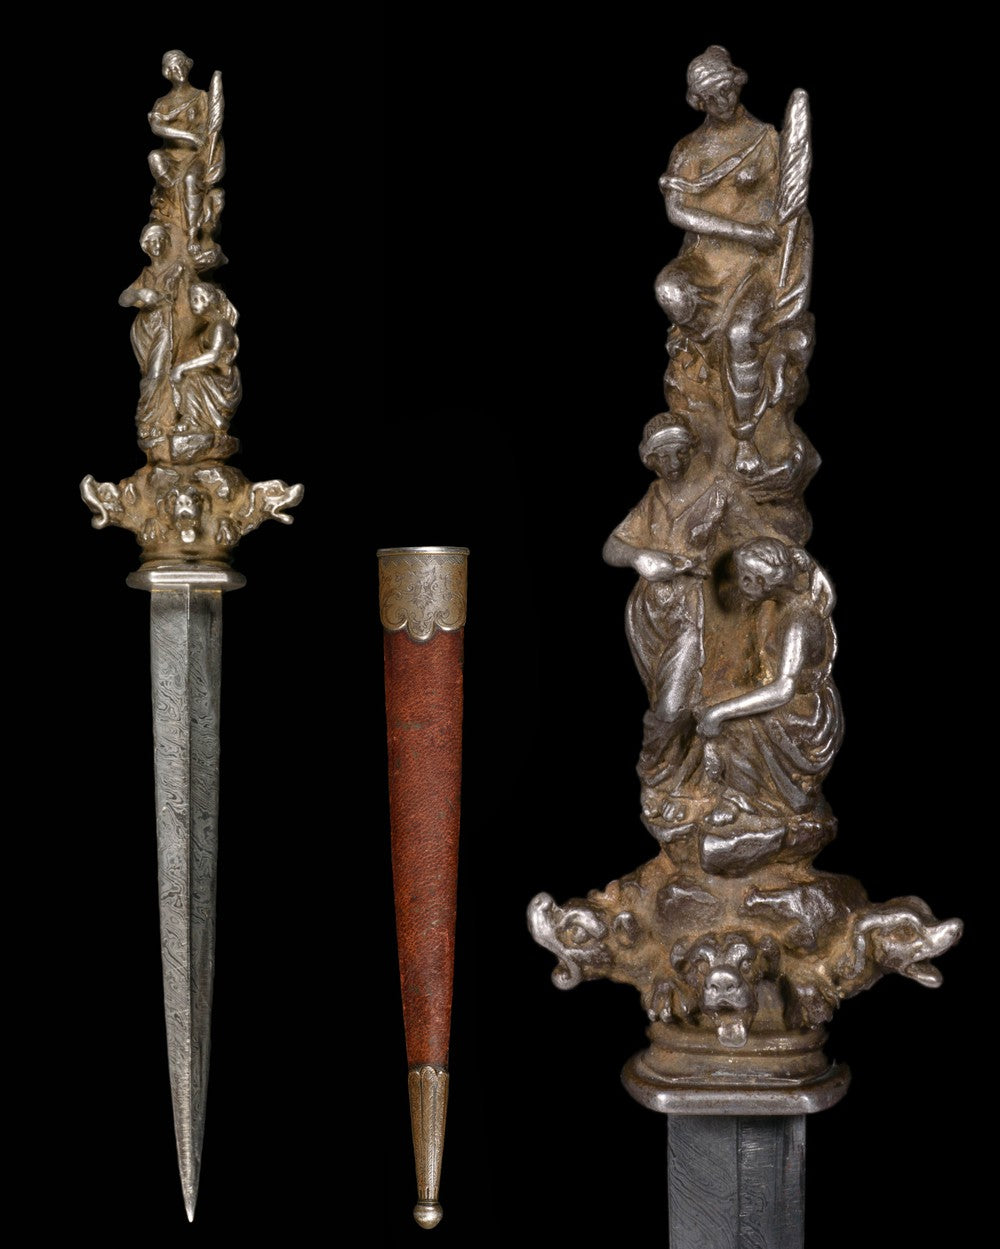 ESOTERIC CEREMONIAL RITUAL DAGGER THE 3 PARQUES AND THE HOUND OF HELL - RELICS